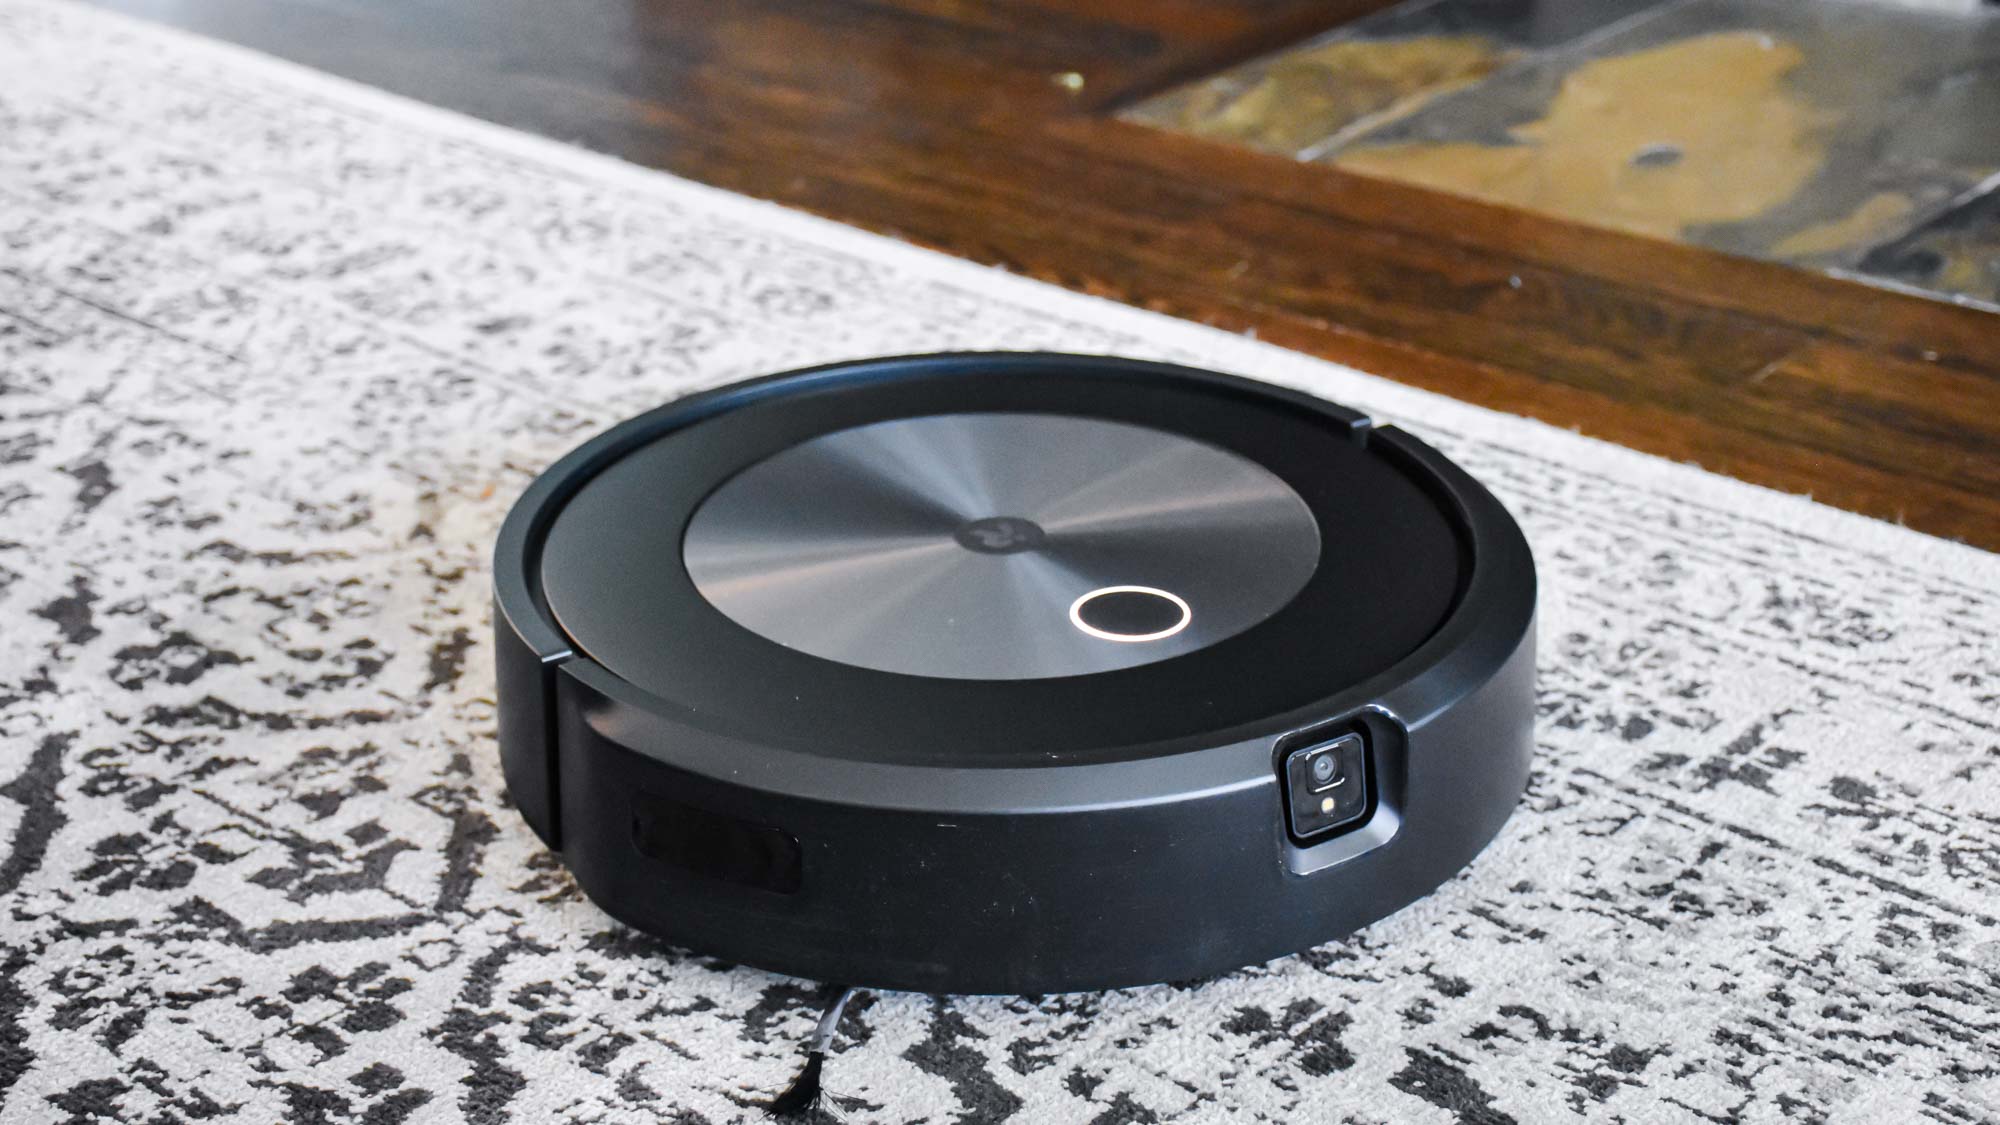 A iRobot Roomba j7+ on a black and white carpet on top of hardwood